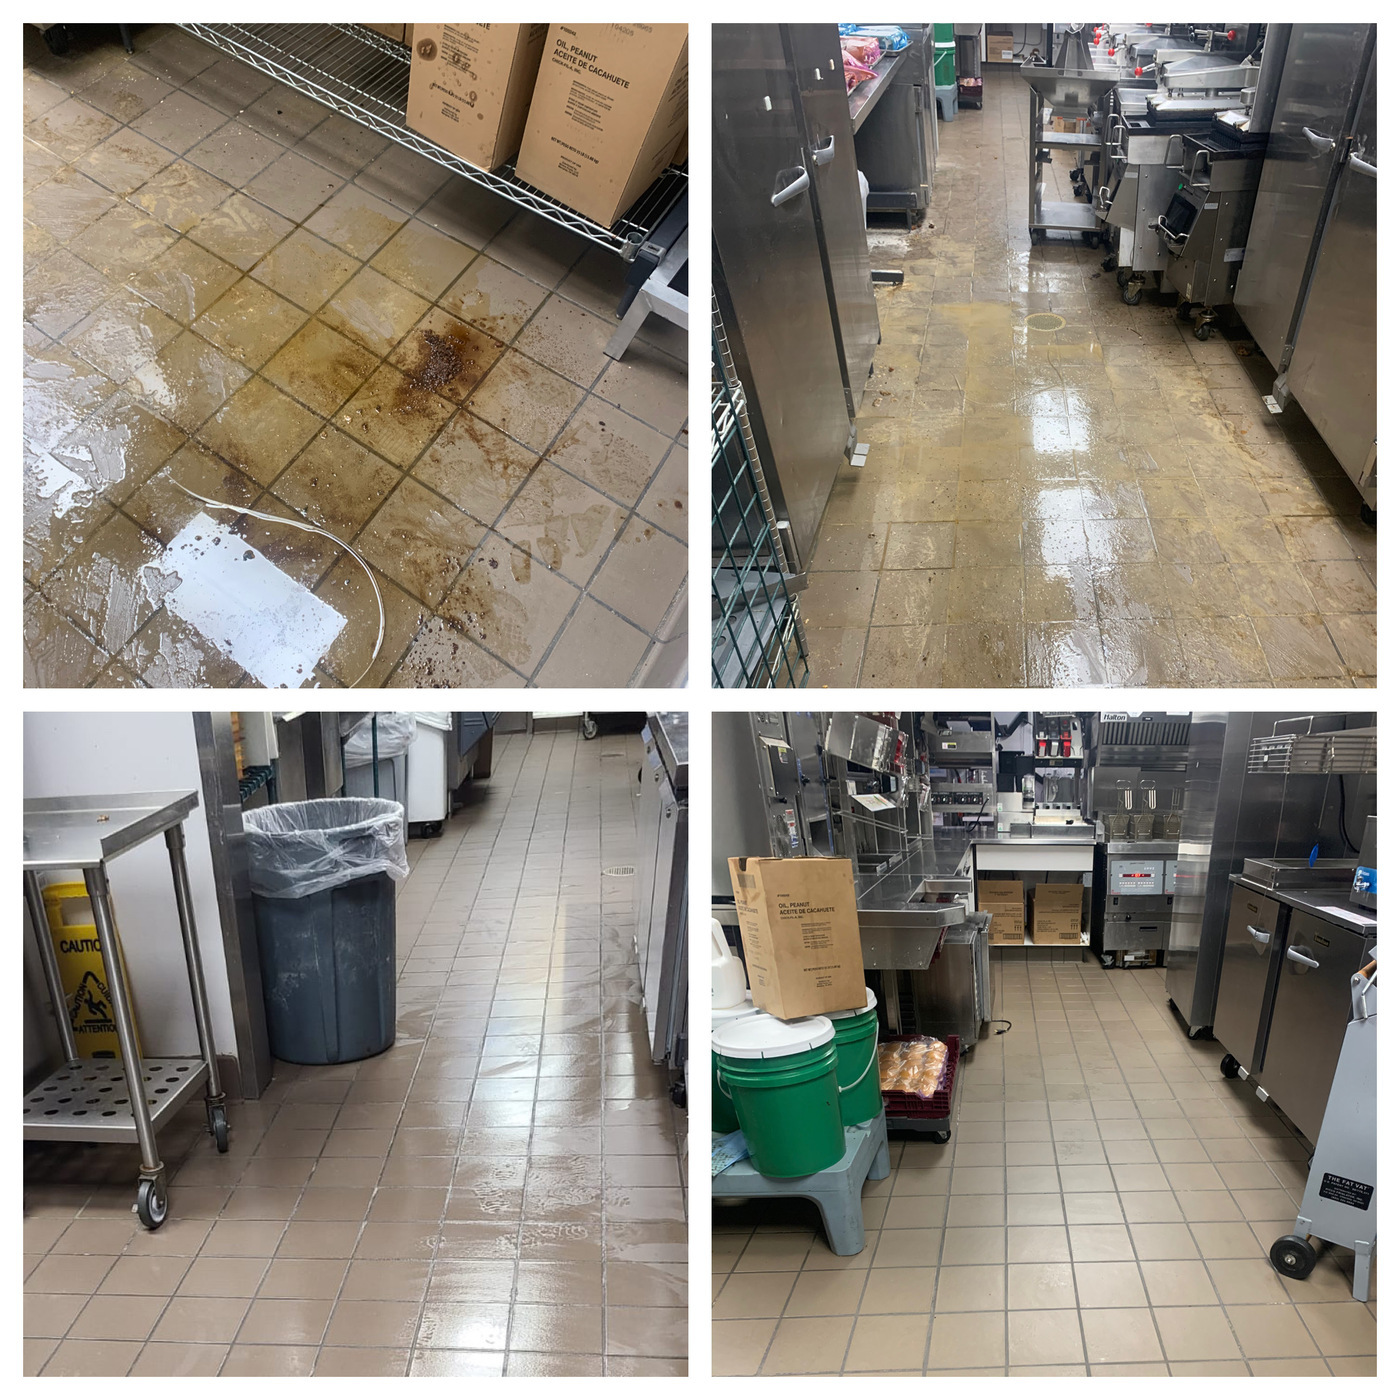 Excellence Janitorial Services is a family owned and operated cleaning business in Kingston, PA.